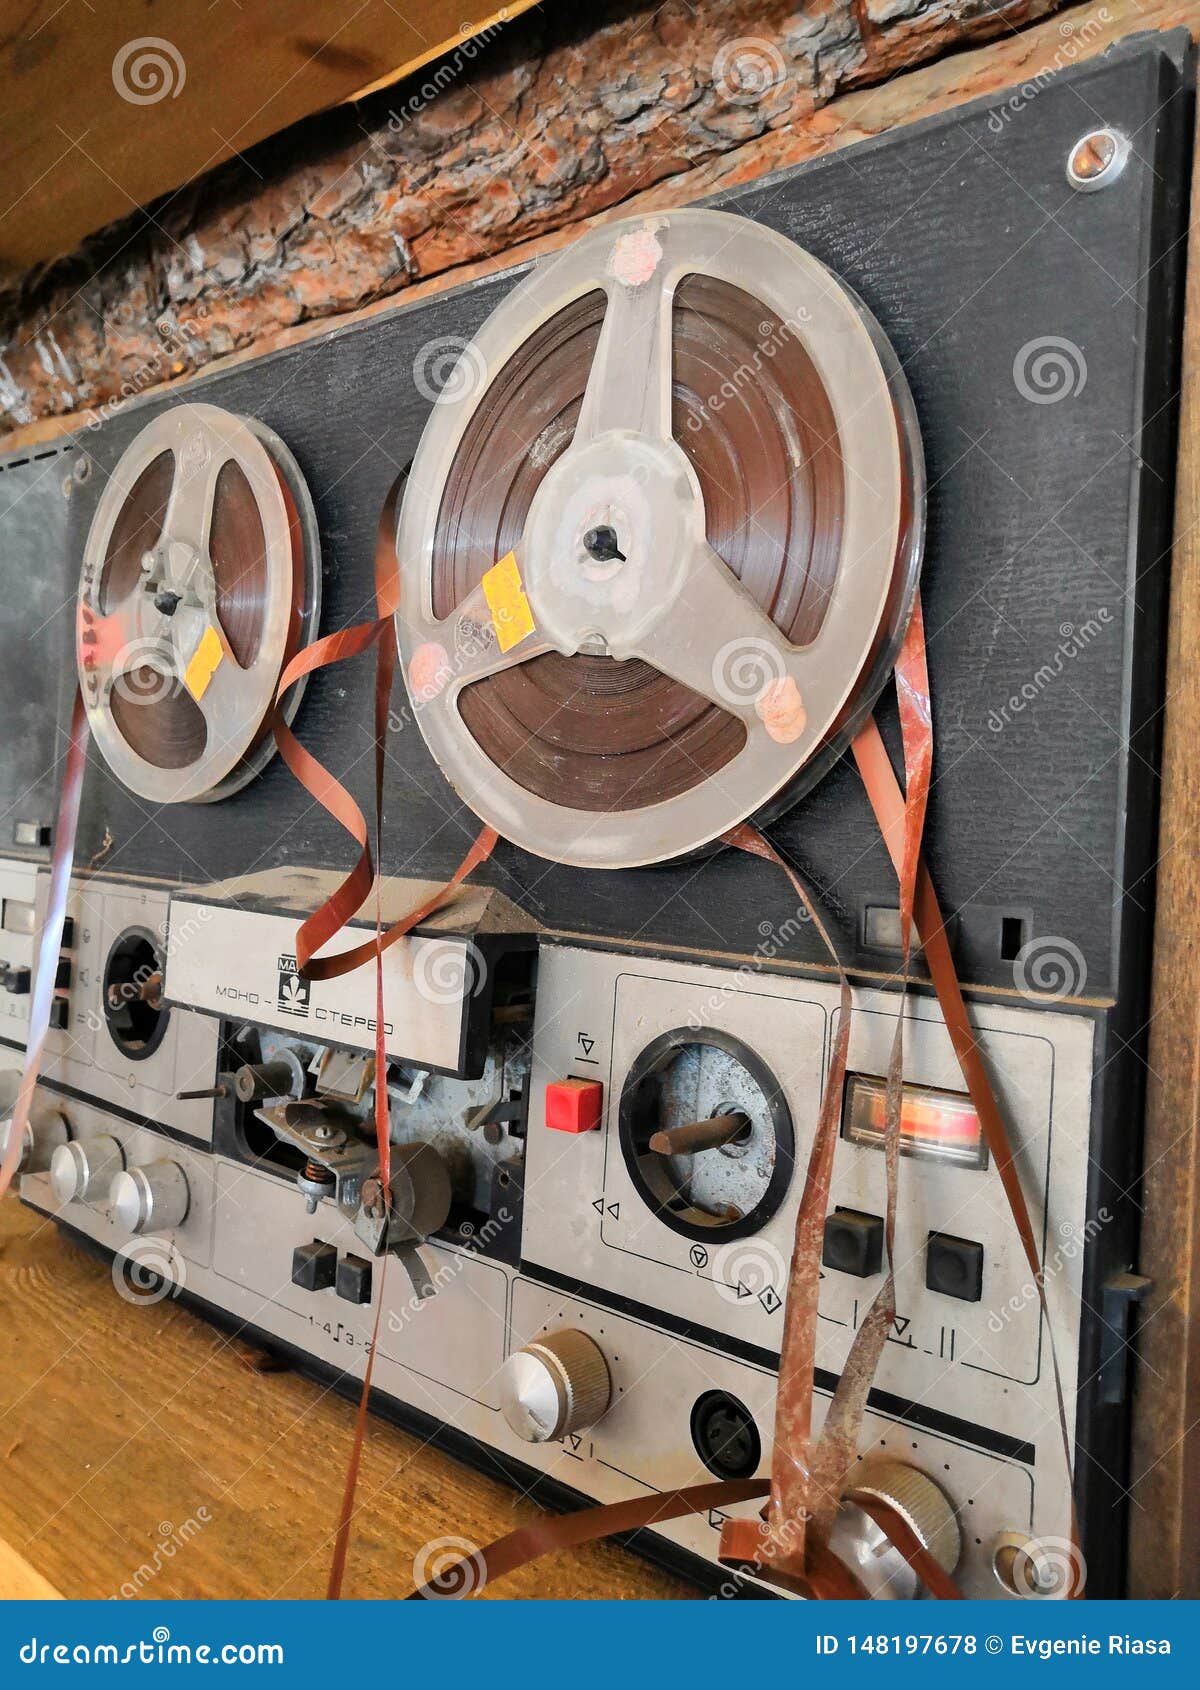 Old Broken Reel. Old Music Center Studio Tape Recorder. the Tape is Wound  on a Reel Bobbin Editorial Stock Photo - Image of famous, cable: 148197678